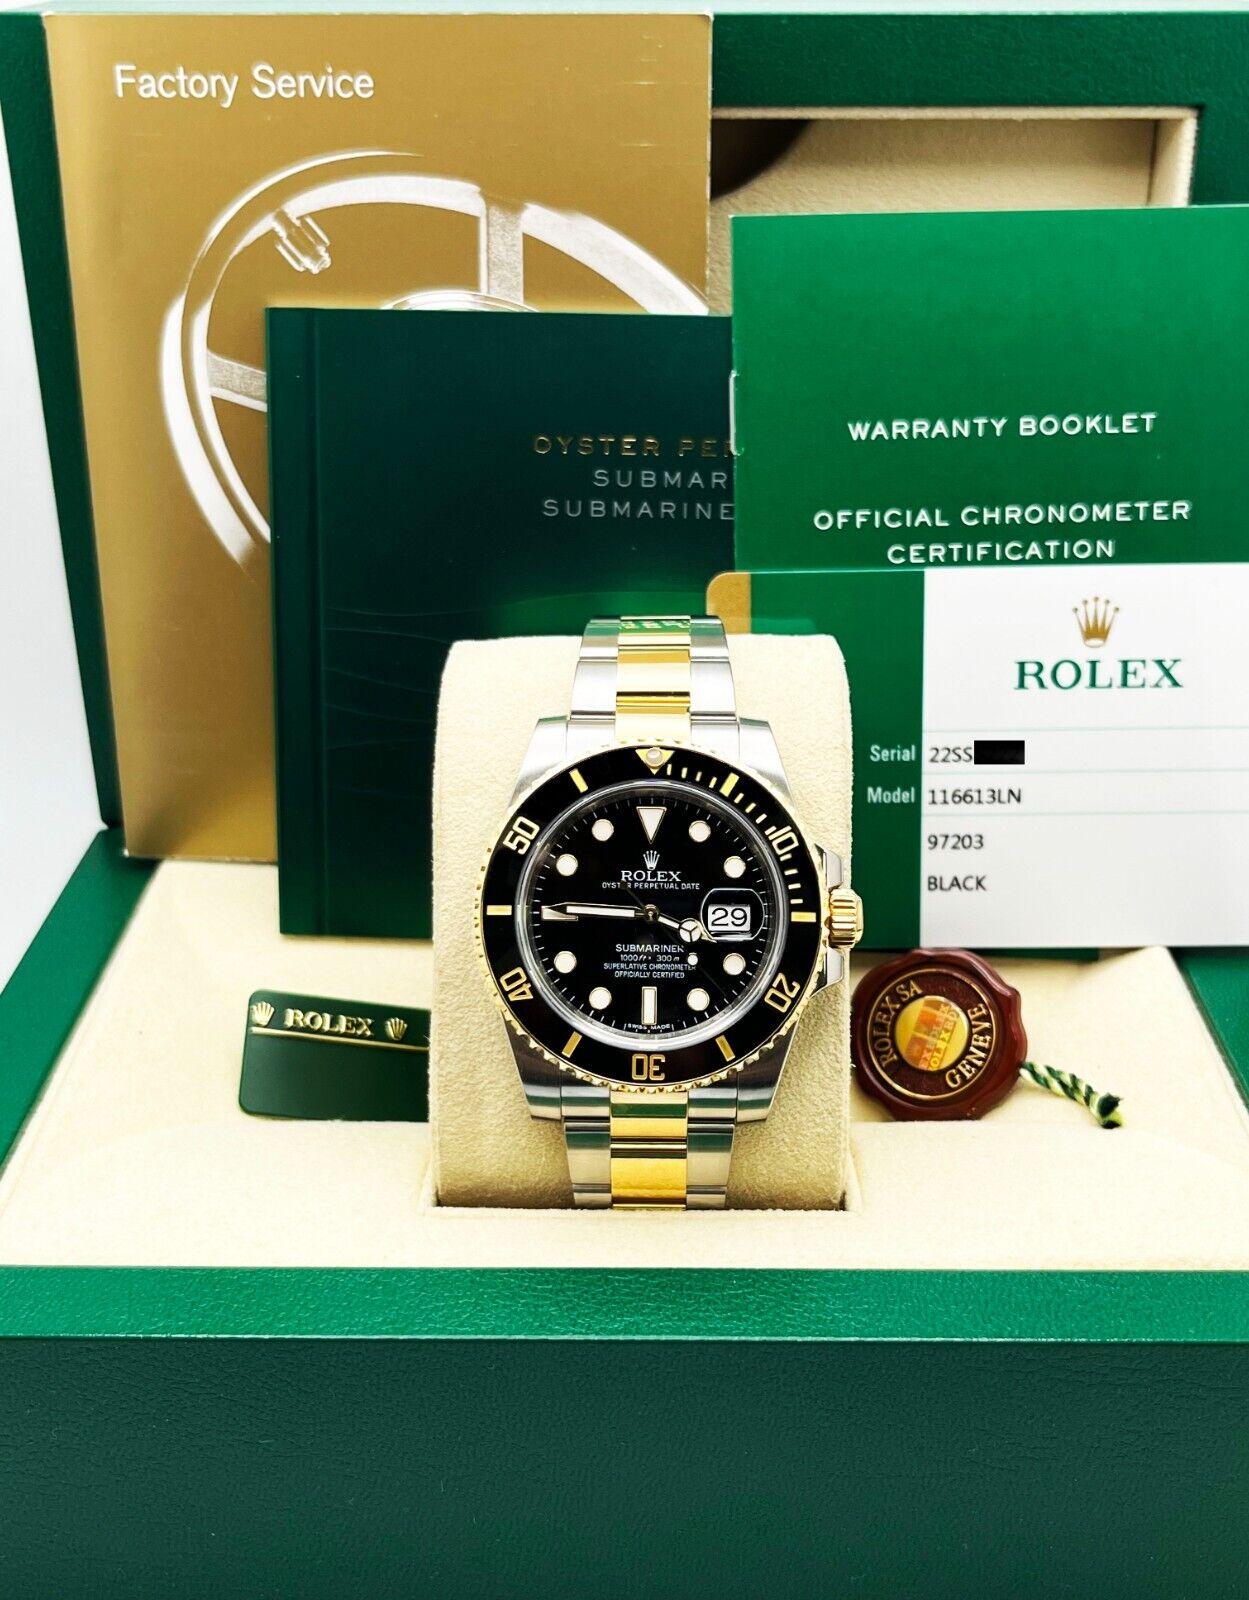 Style Number: 116613

Serial: 22SS5*** 

Year: 2015
 
Model: Submariner
 
Case Material: Stainless Steel
 
Band: 18K Yellow Gold & Stainless Steel
 
Bezel: Black Ceramic
 
Dial: Black 
 
Face: Sapphire
 
Case Size: 40mm
 
Includes: 
-Rolex Box &